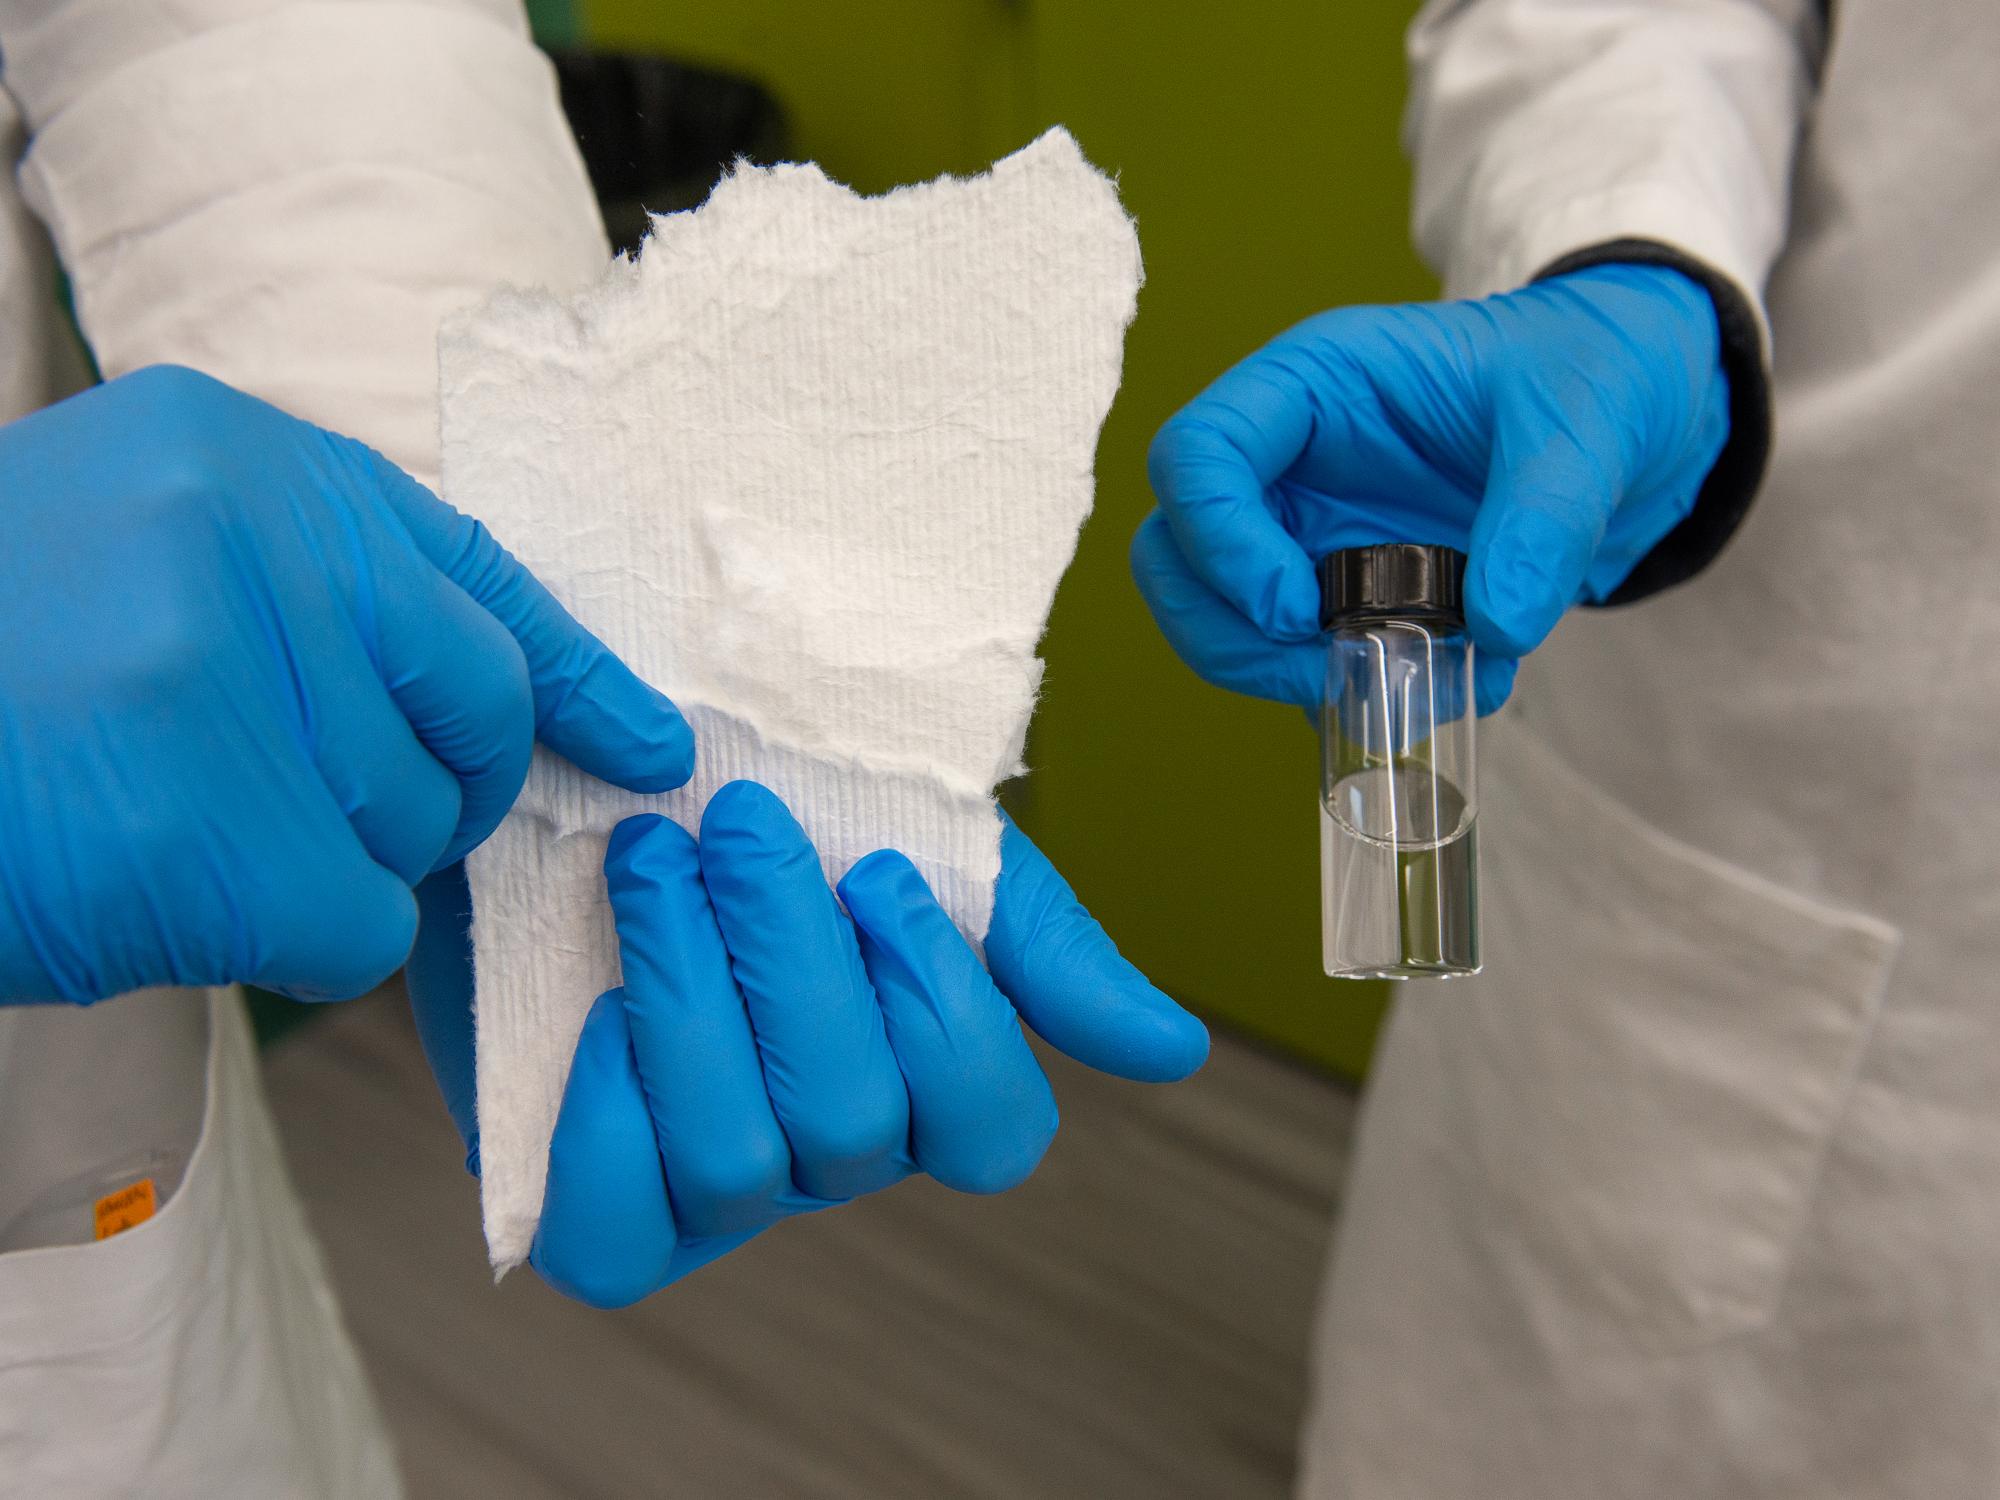 "Amir Sheikhi, Penn State assistant professor of chemical engineering, found a new process to separate and recycle rare earth elements using plant cellulose, an inexpensive renewable resource found in paper, cotton and pulp, like the paper towel shown here. The vial contains the nanoparticles that are used to separate rare earth elements from old computers and circuit boards. Credit: Kate Myers. All Rights Reserved."